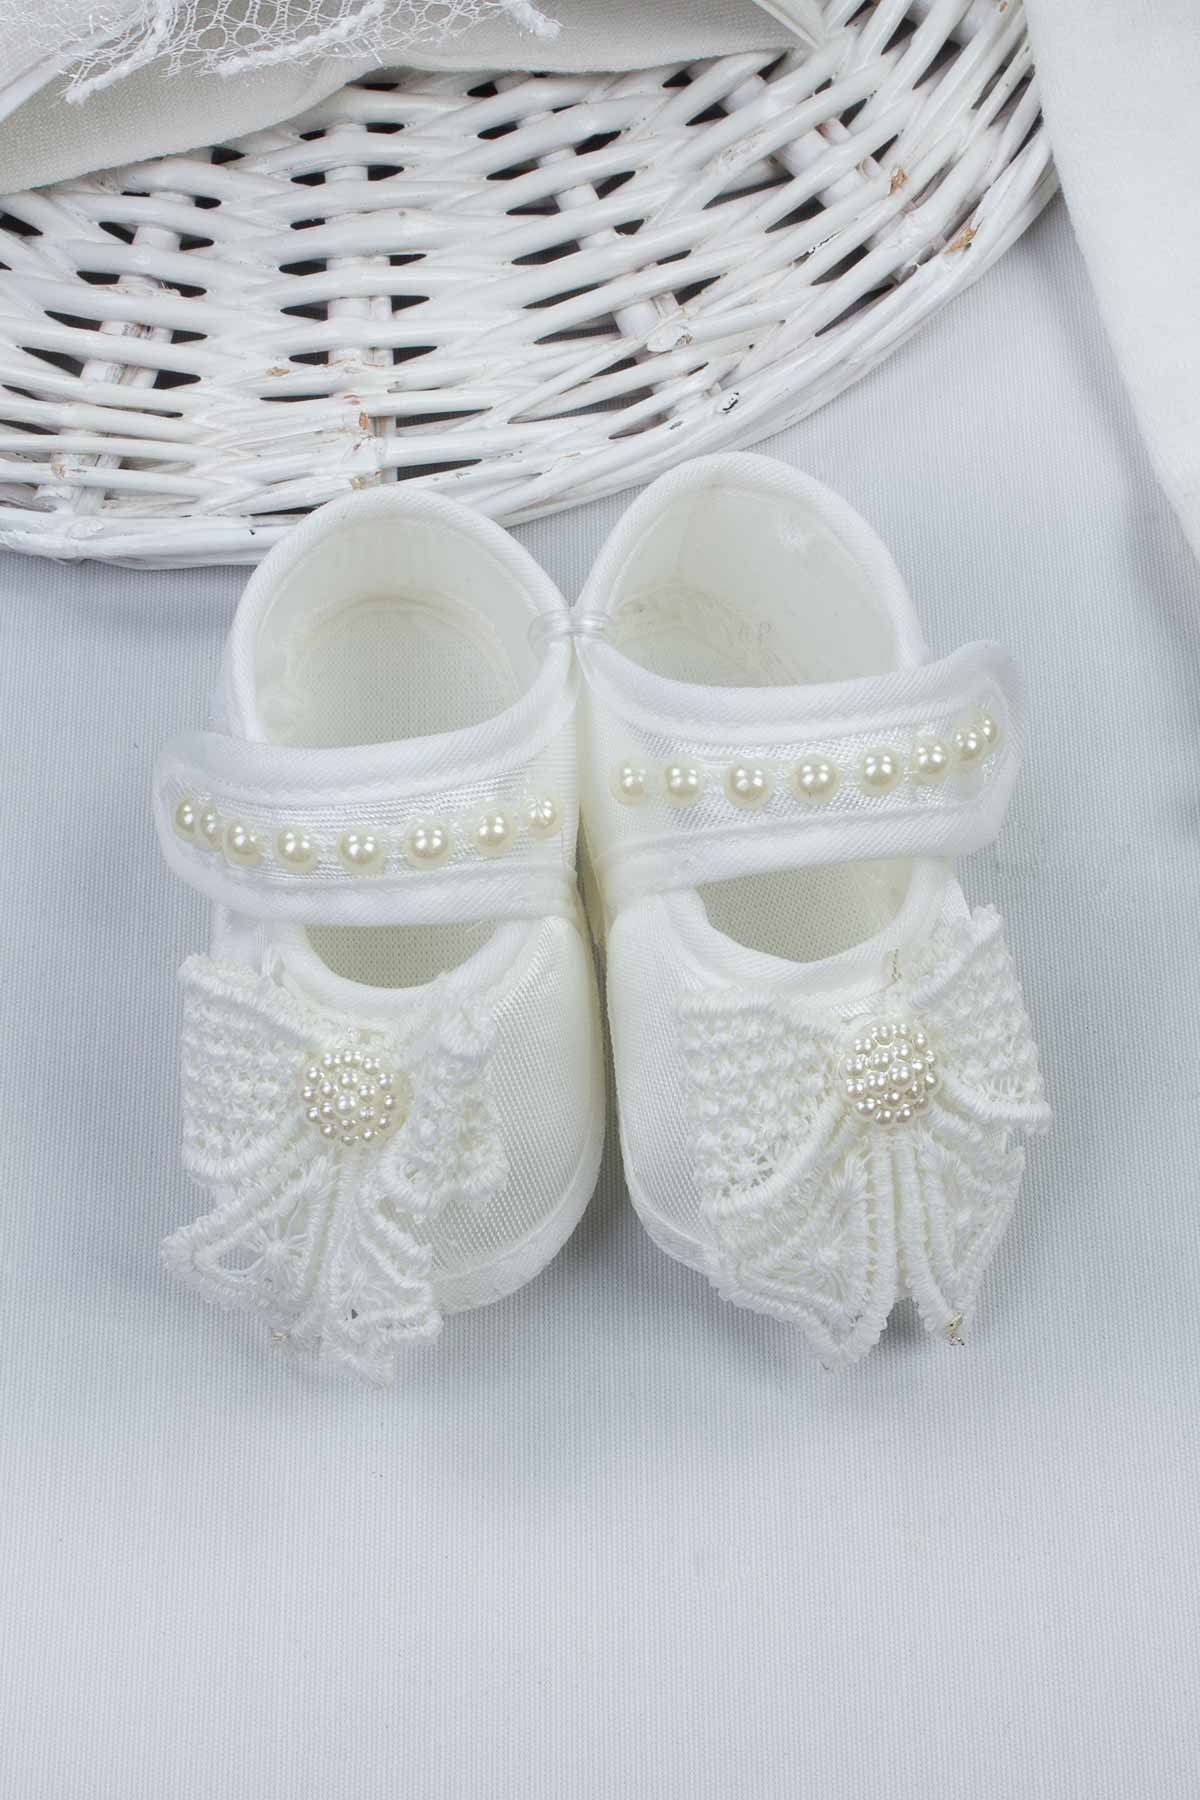 White Baby Girl Newborn Gift Suit Set Girls Babies Tights Stockings Hair Bandanas Shoes Fashion Style 2021 Mom Gift Package